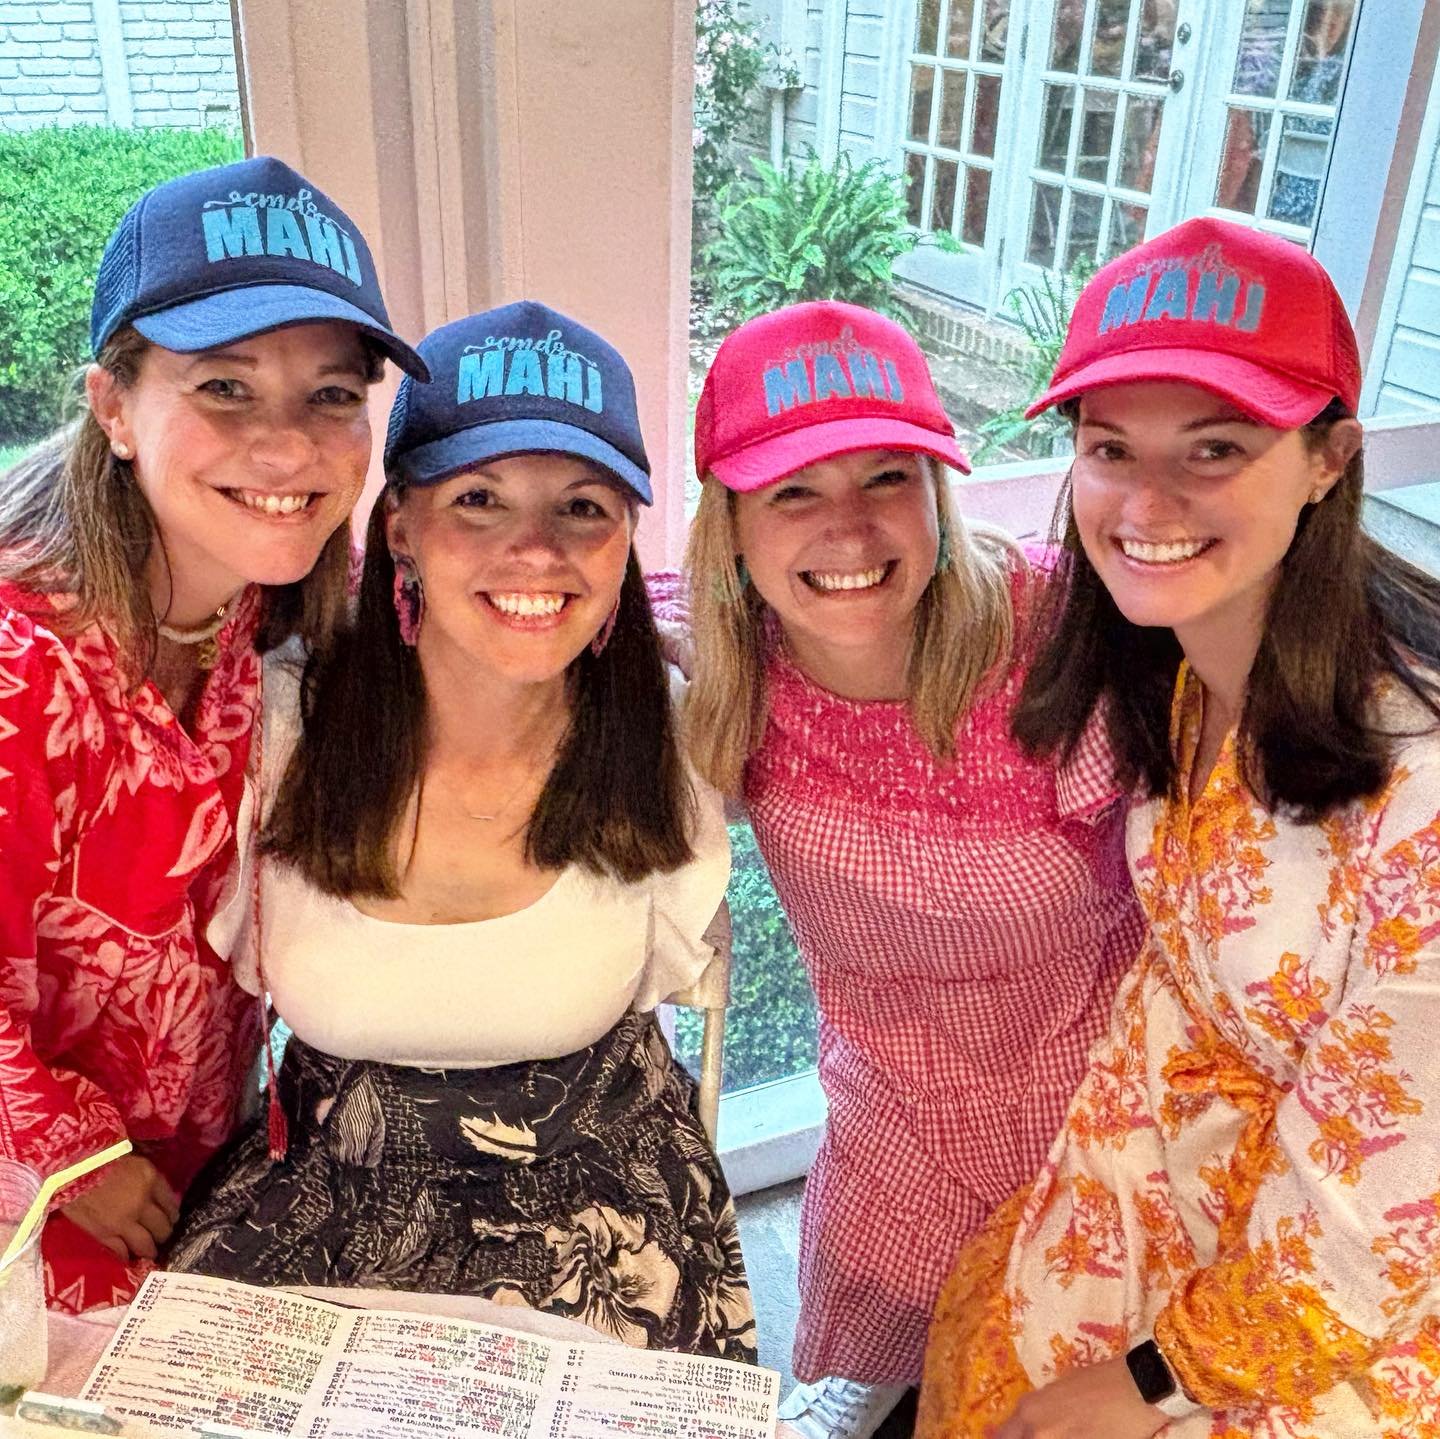 Two amazing events to support the school we love so much! Thank you to everyone who took part in the 10th Annual CMDS Golf Tournament and the Cinco de Mahjong event over the weekend. We are grateful your generosity and support!  The CMDS community is